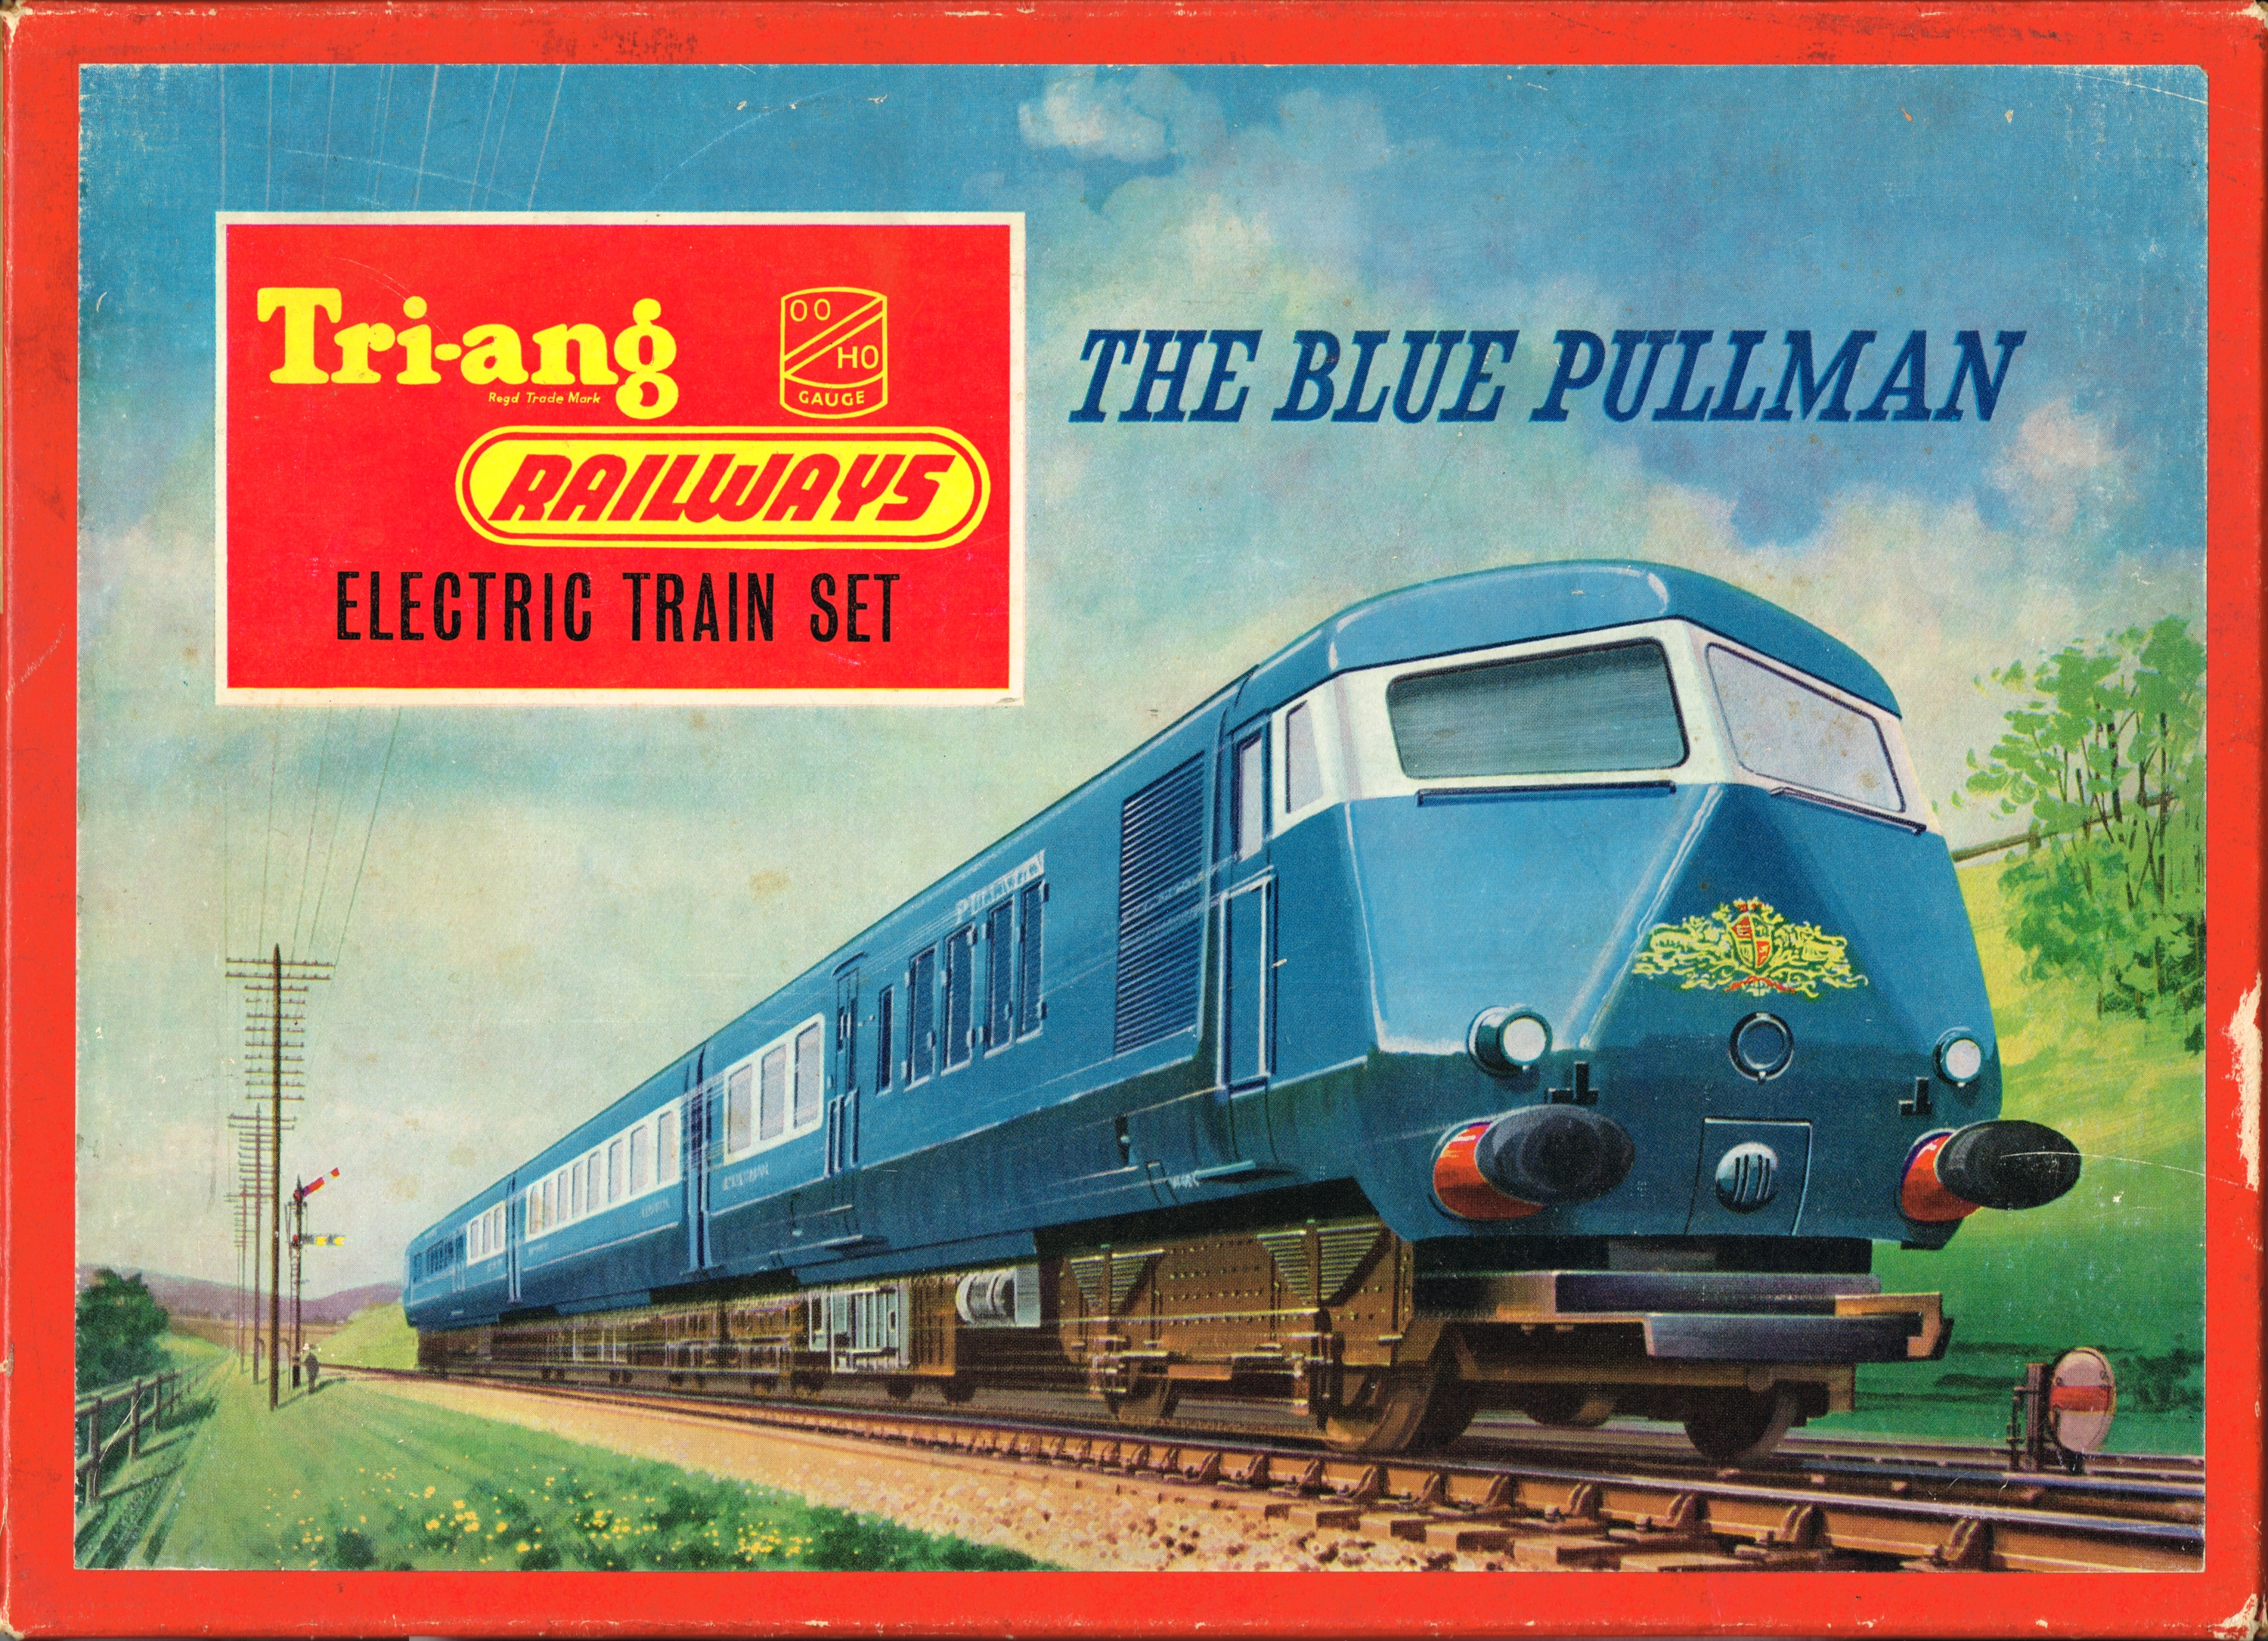 Triang Railways The Blue Pullman Old Smoky Dockmaster set of 3 A4 Posters Prints 